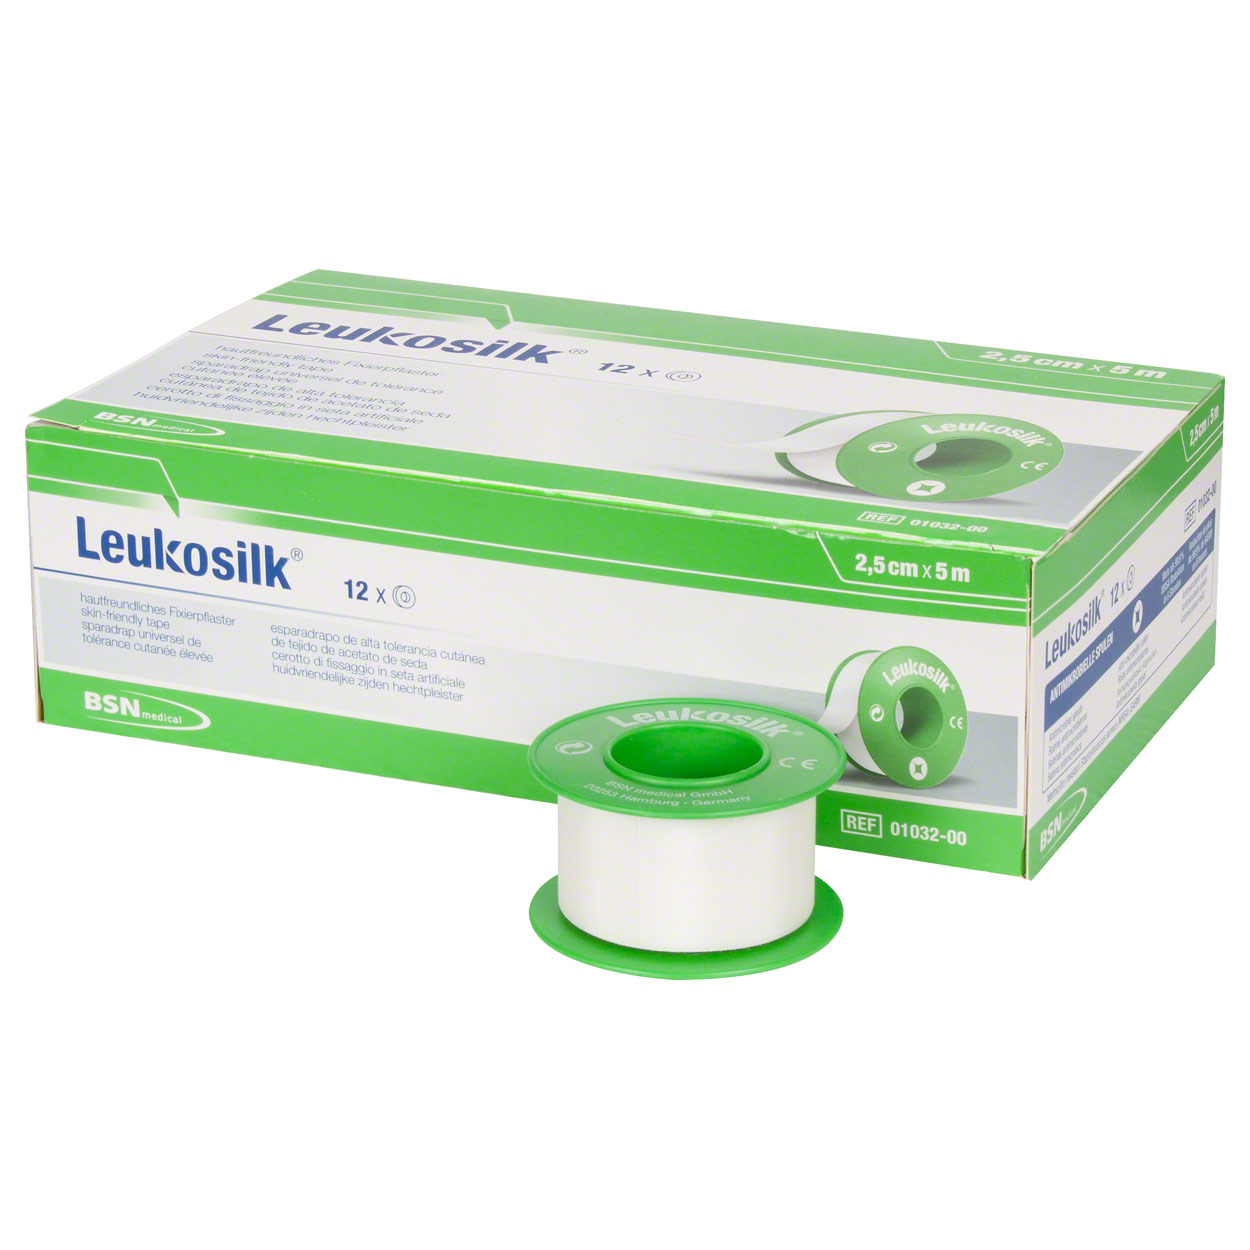 Leukosilk roll plaster without cover, 5 m x 2,5 cm, 12 pieces buy online